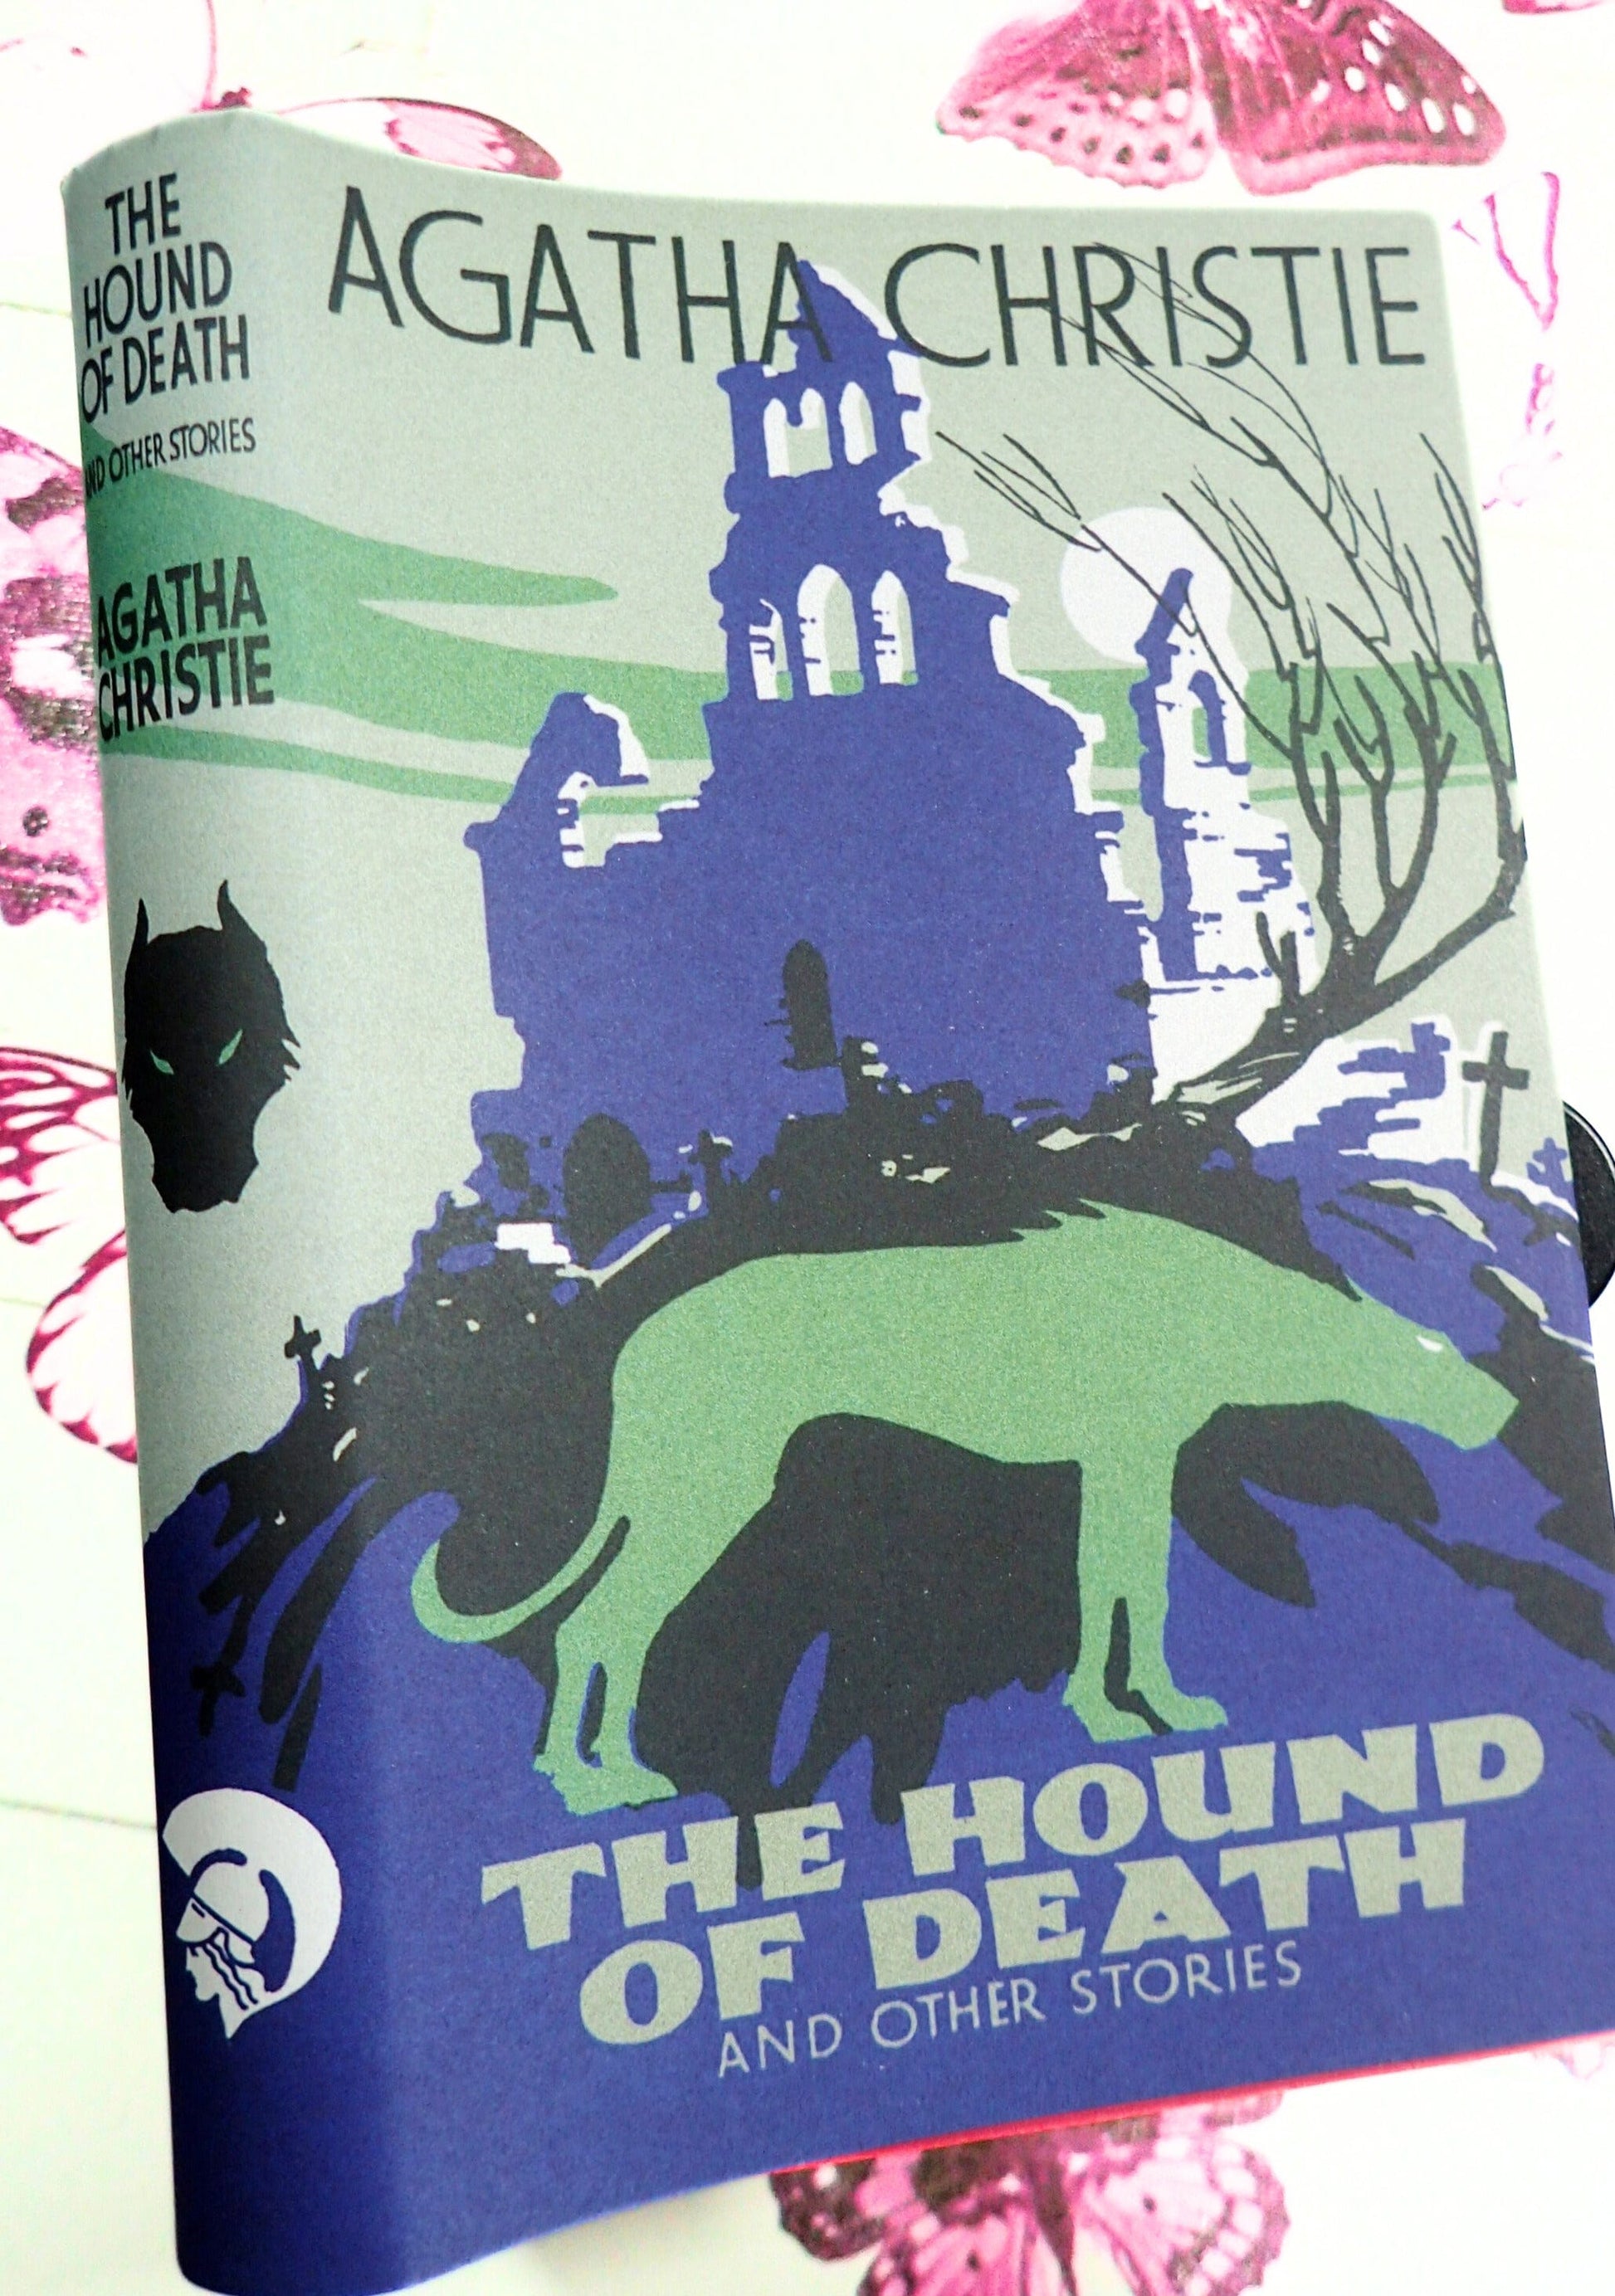 Dust Jacket of The Hound of Death Agatha Christie And Other Stories Facsimile 2014 showing hound motif